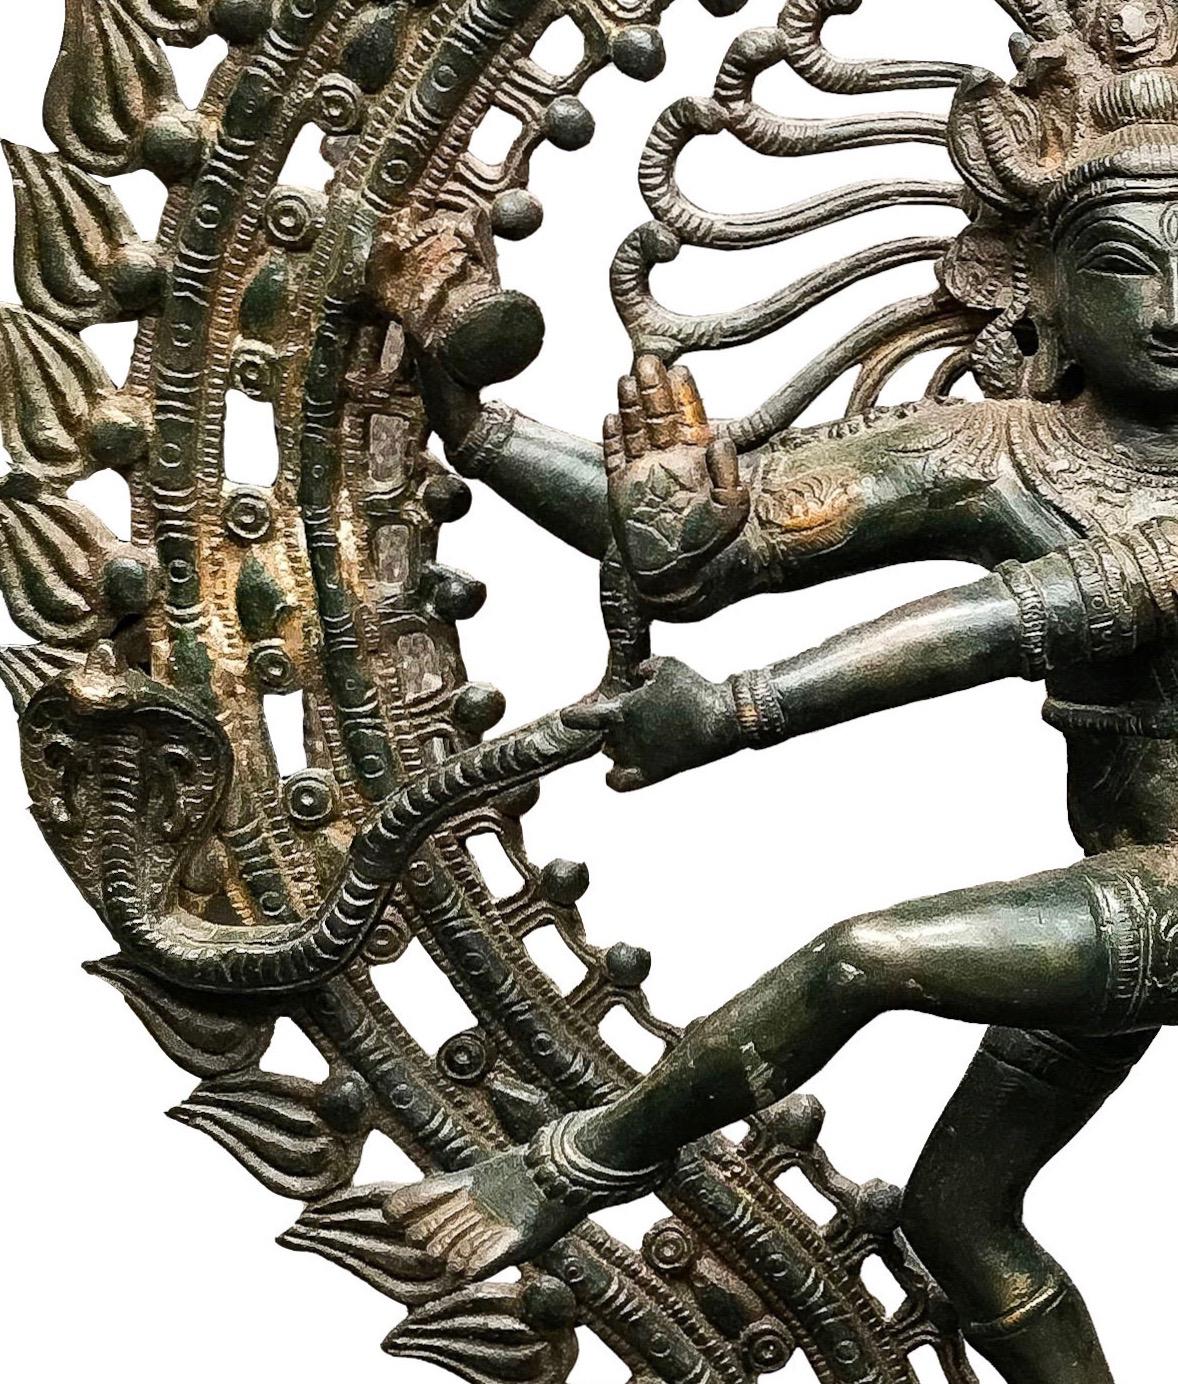 The figure of God Shiva, creator god, preserver and destroyer of the world, in his attitude of Natarasha, also known as the lord of the cosmic dance. This dancing piece is standing on a lotus flower which symbolize the waters from where a dwarf